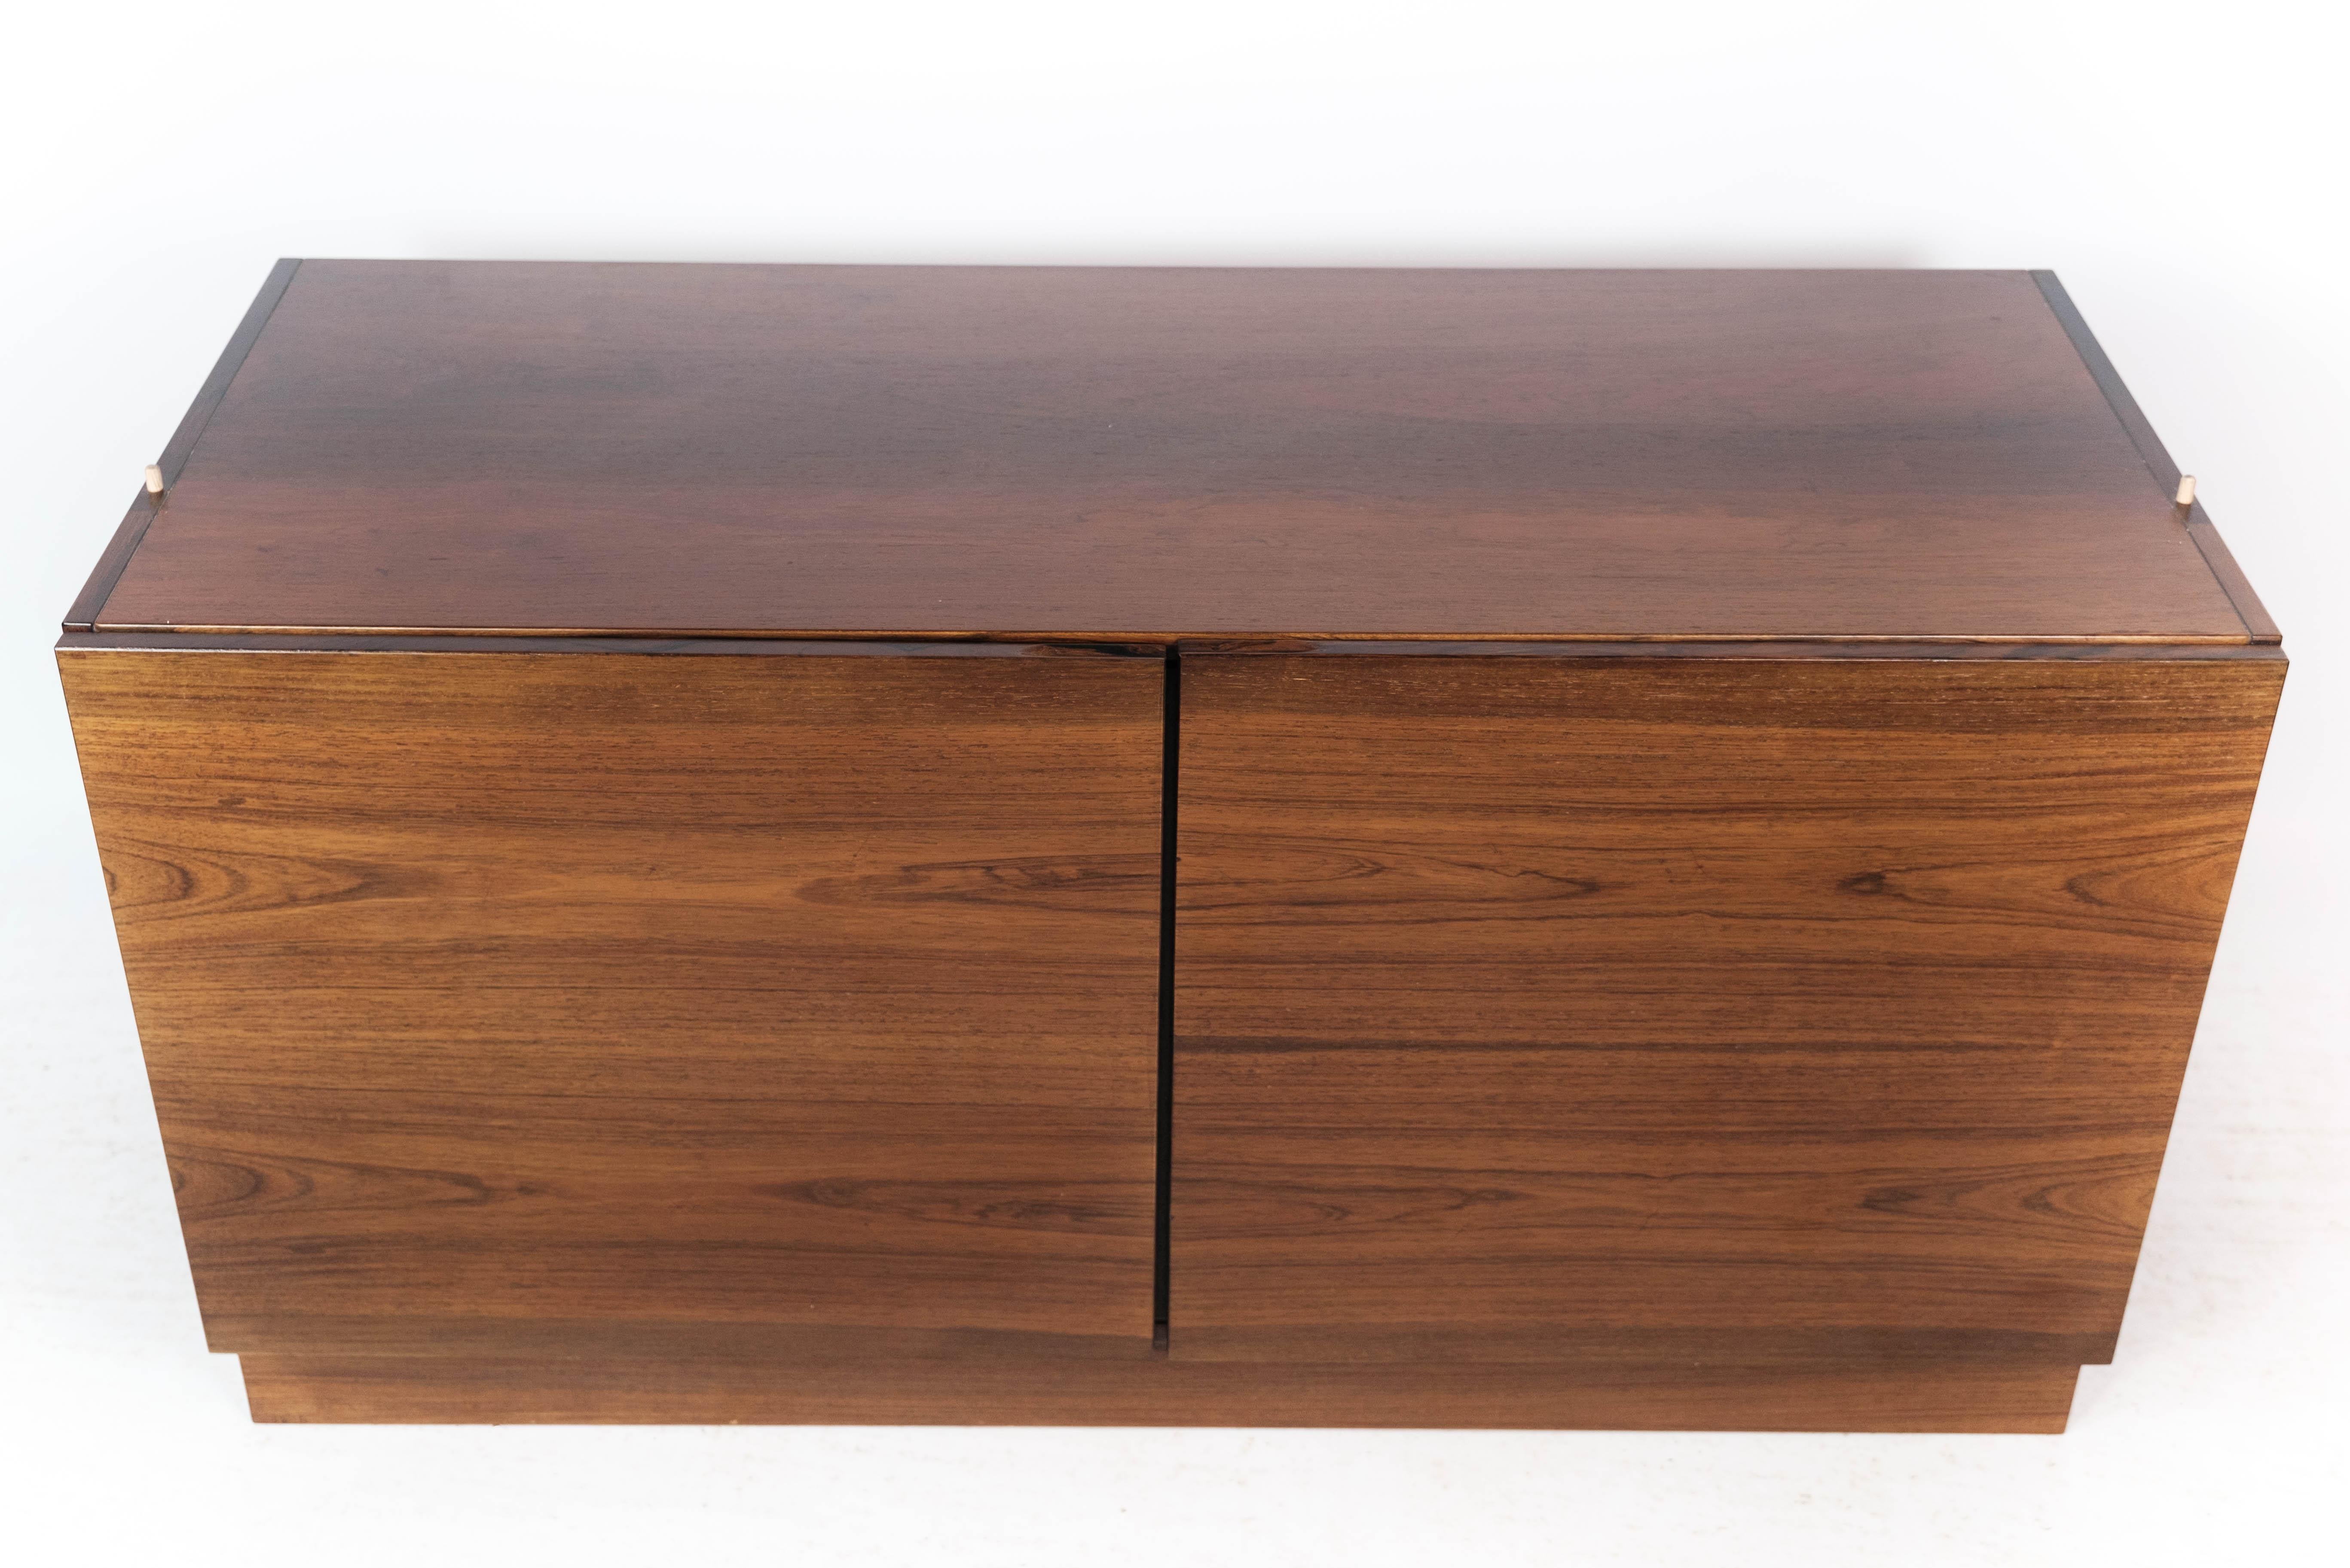 Low chest of drawers in rosewood of Danish design from the 1960s. The chest is in great vintage condition.